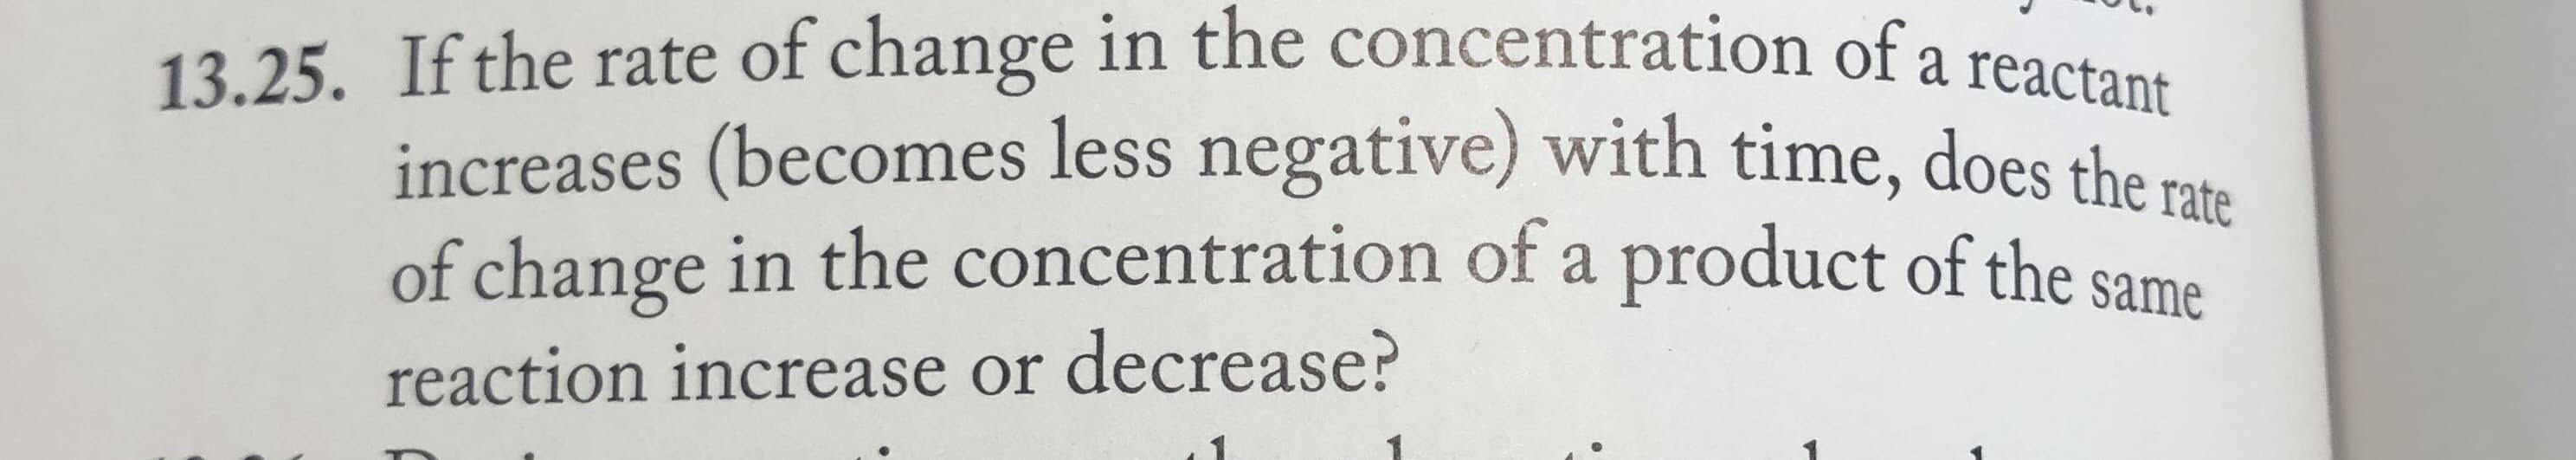 13.25. If the rate of change in the concentration of a reactare
increases (becomes less negative) with time, does the rate
of change in the concentration of a product of the same
reaction increase or decrease?
